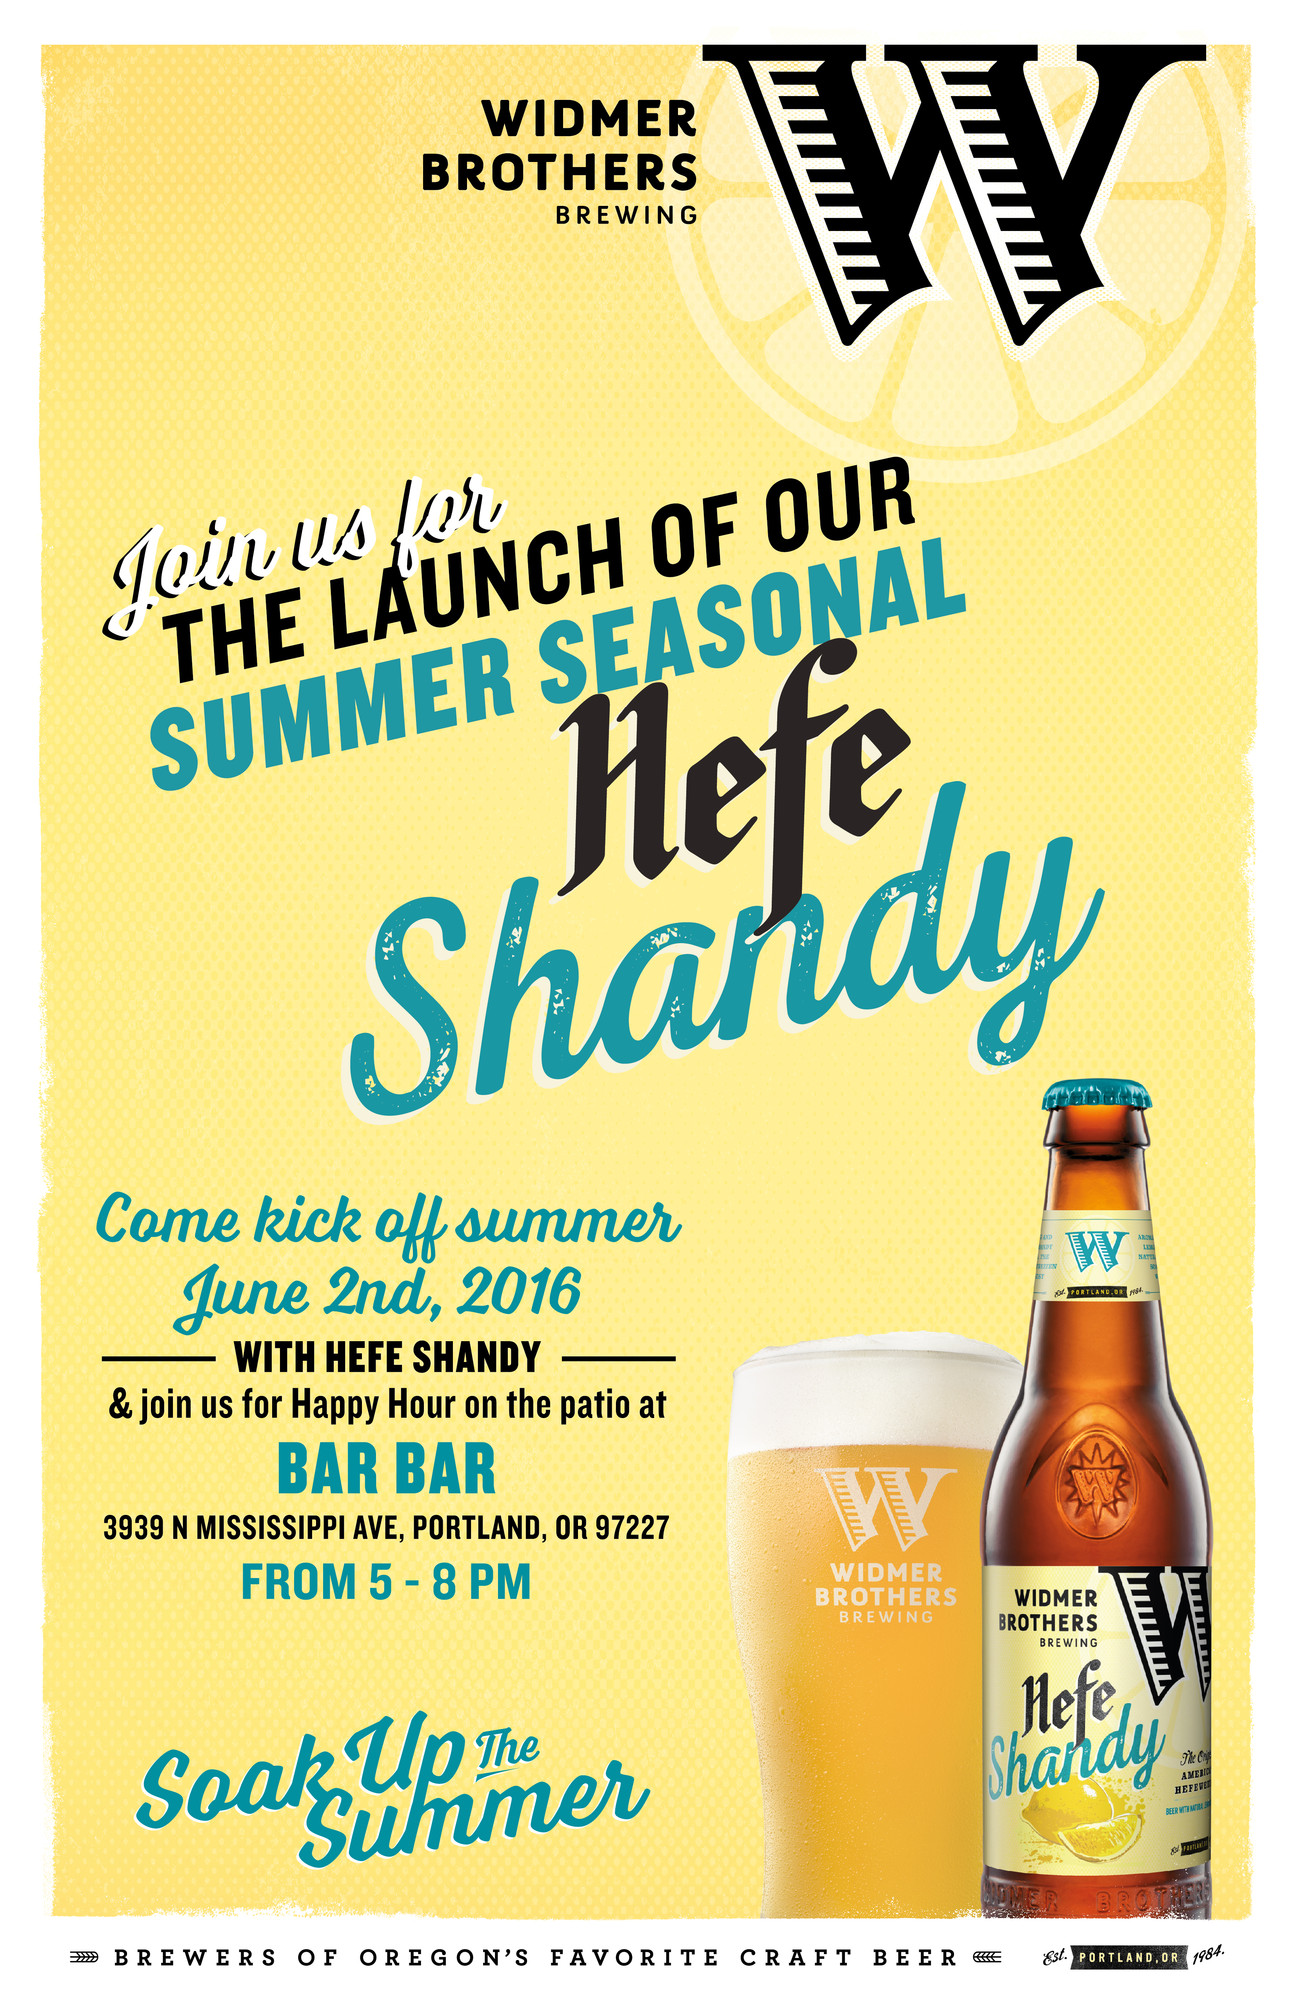 WIDMER BROTHERS BREWING RELEASES HEFE SHANDY Launch Party with Hefe Shandy Slushies at Bar Bar on June 2